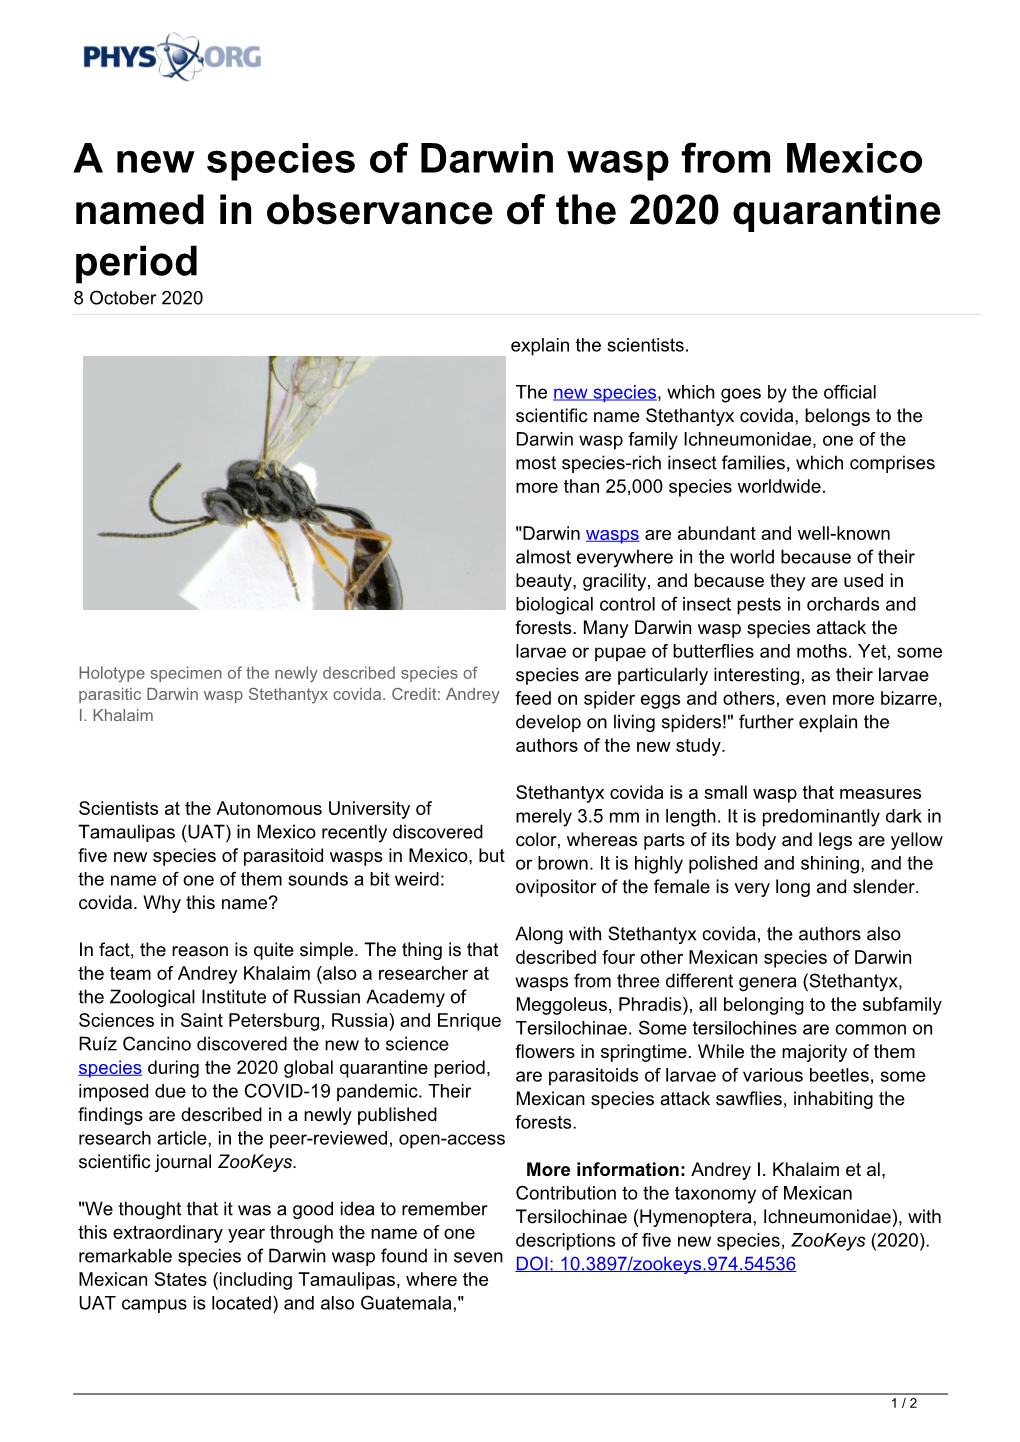 A New Species of Darwin Wasp from Mexico Named in Observance of the 2020 Quarantine Period 8 October 2020